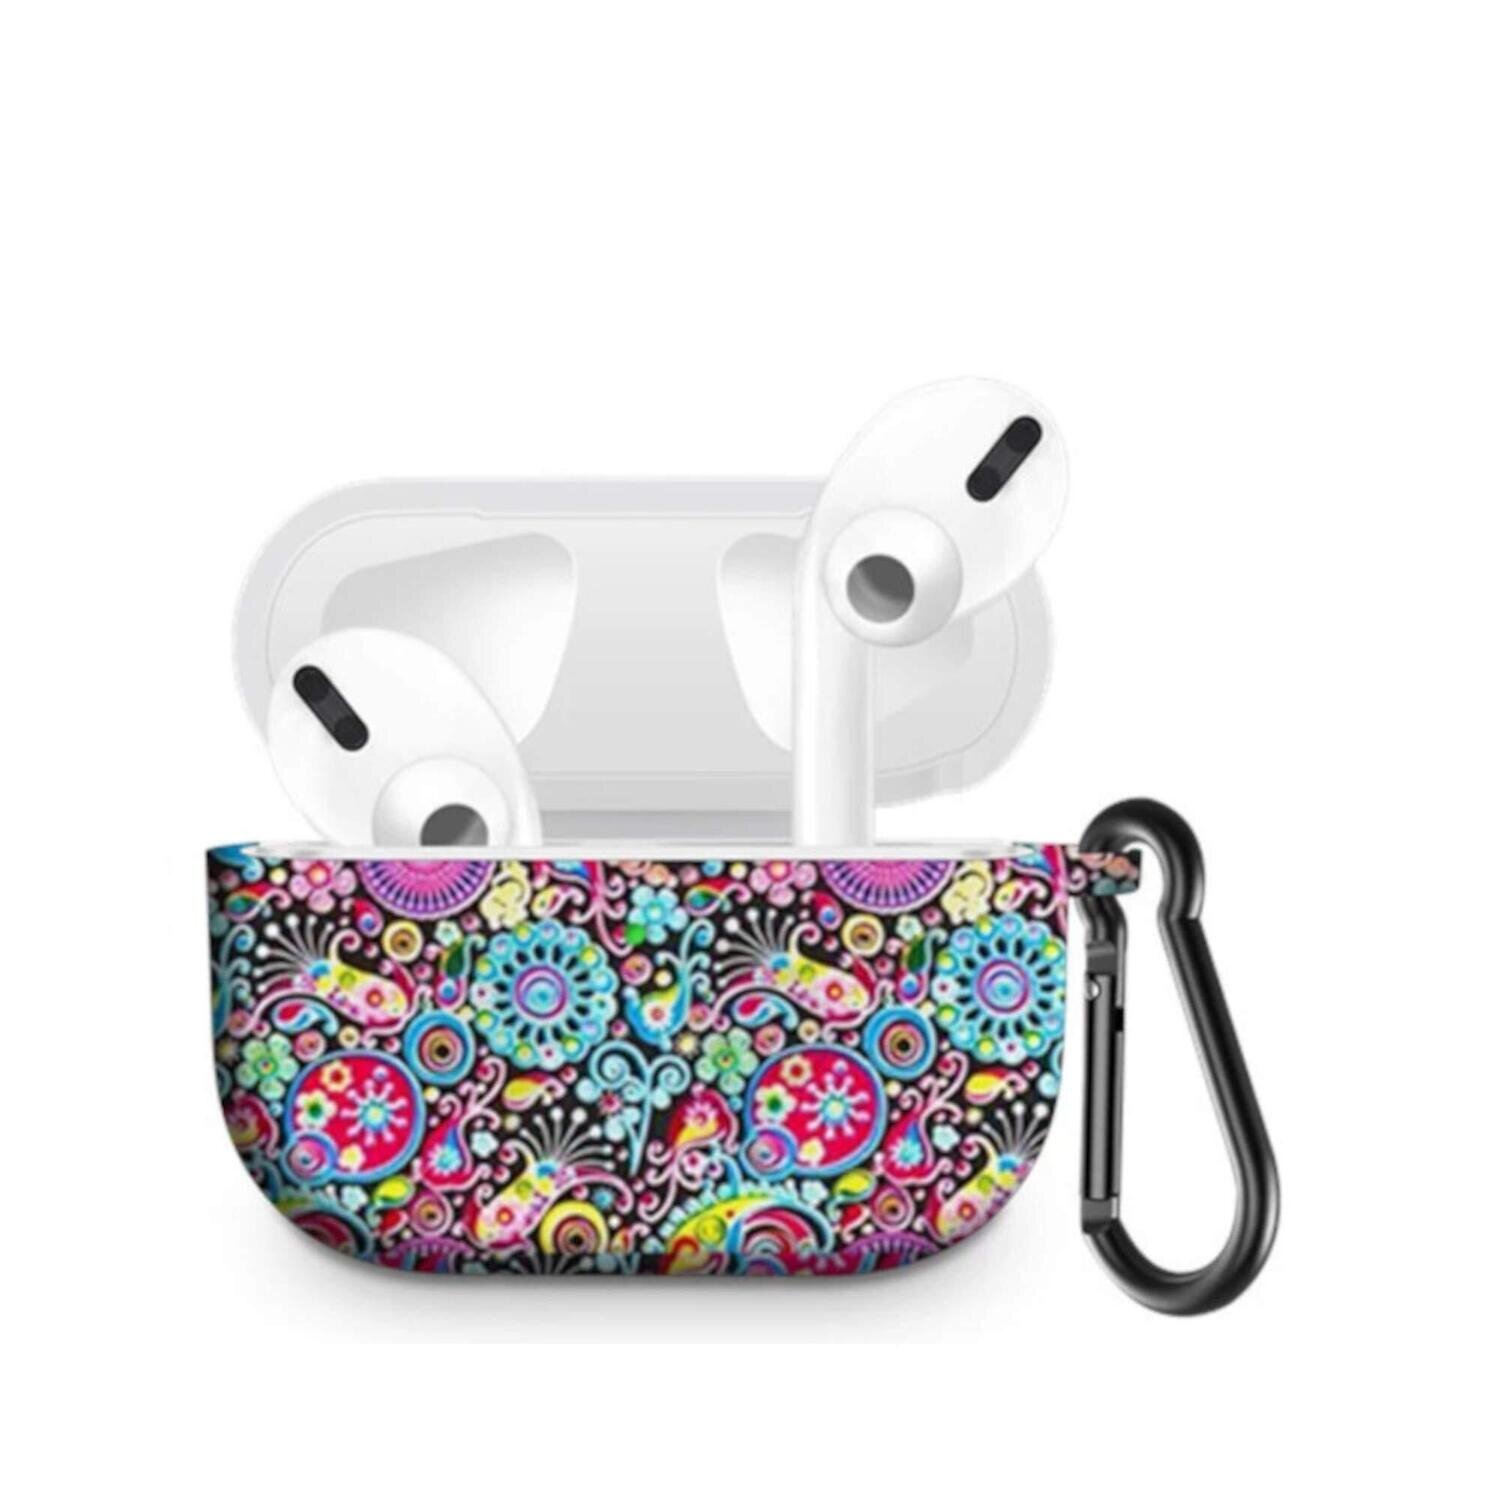 Cute case cover for Airpods Pro | Festival X